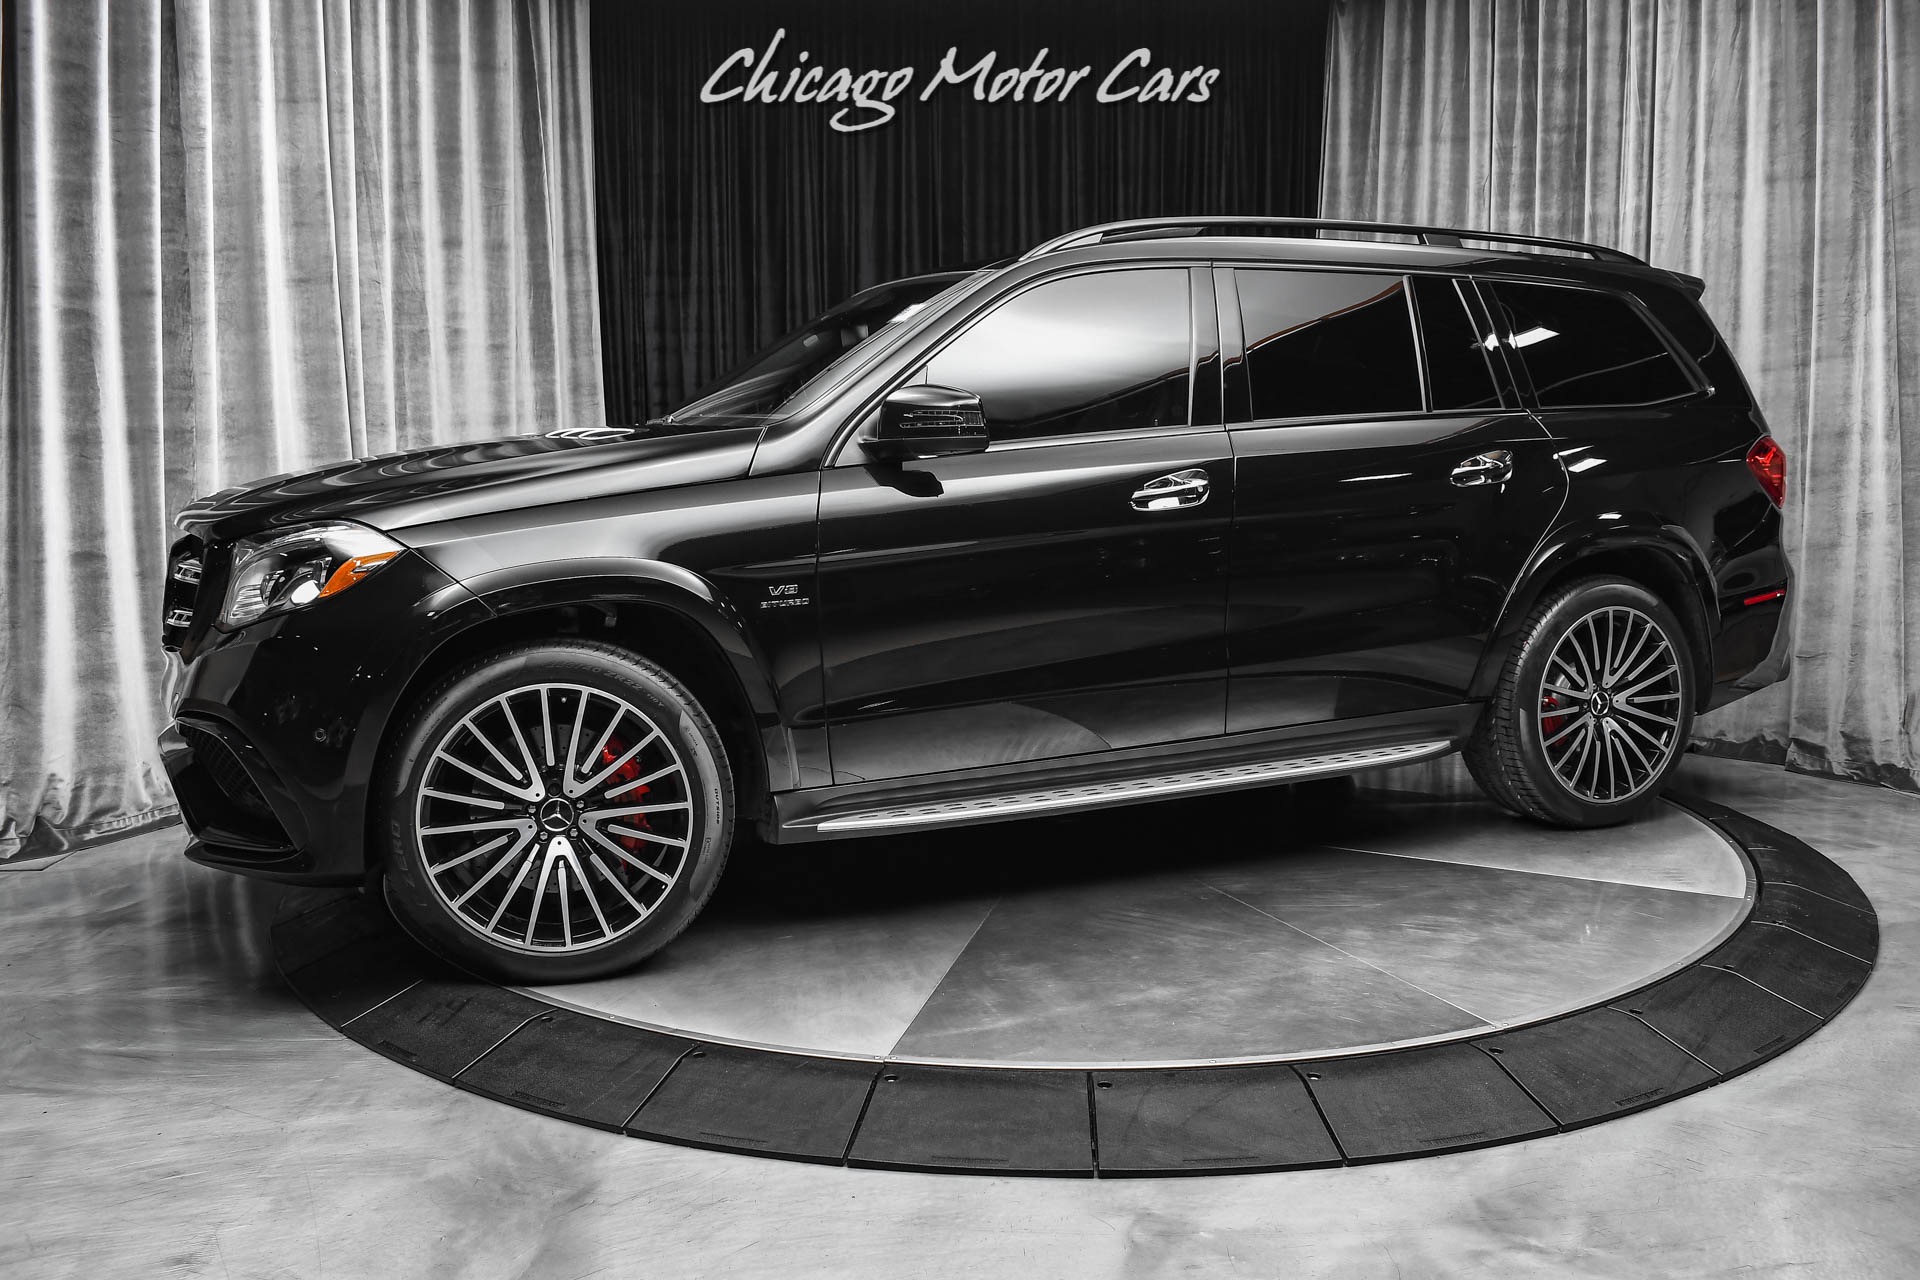 Used 2017 Mercedes-Benz GLS63 63 AMG Original $131K MSRP! AMG NIGHT STYLING  PKG! 22 AMG BLACK WHEELS! For Sale (Special Pricing) | Chicago Motor Cars  Stock #18019A